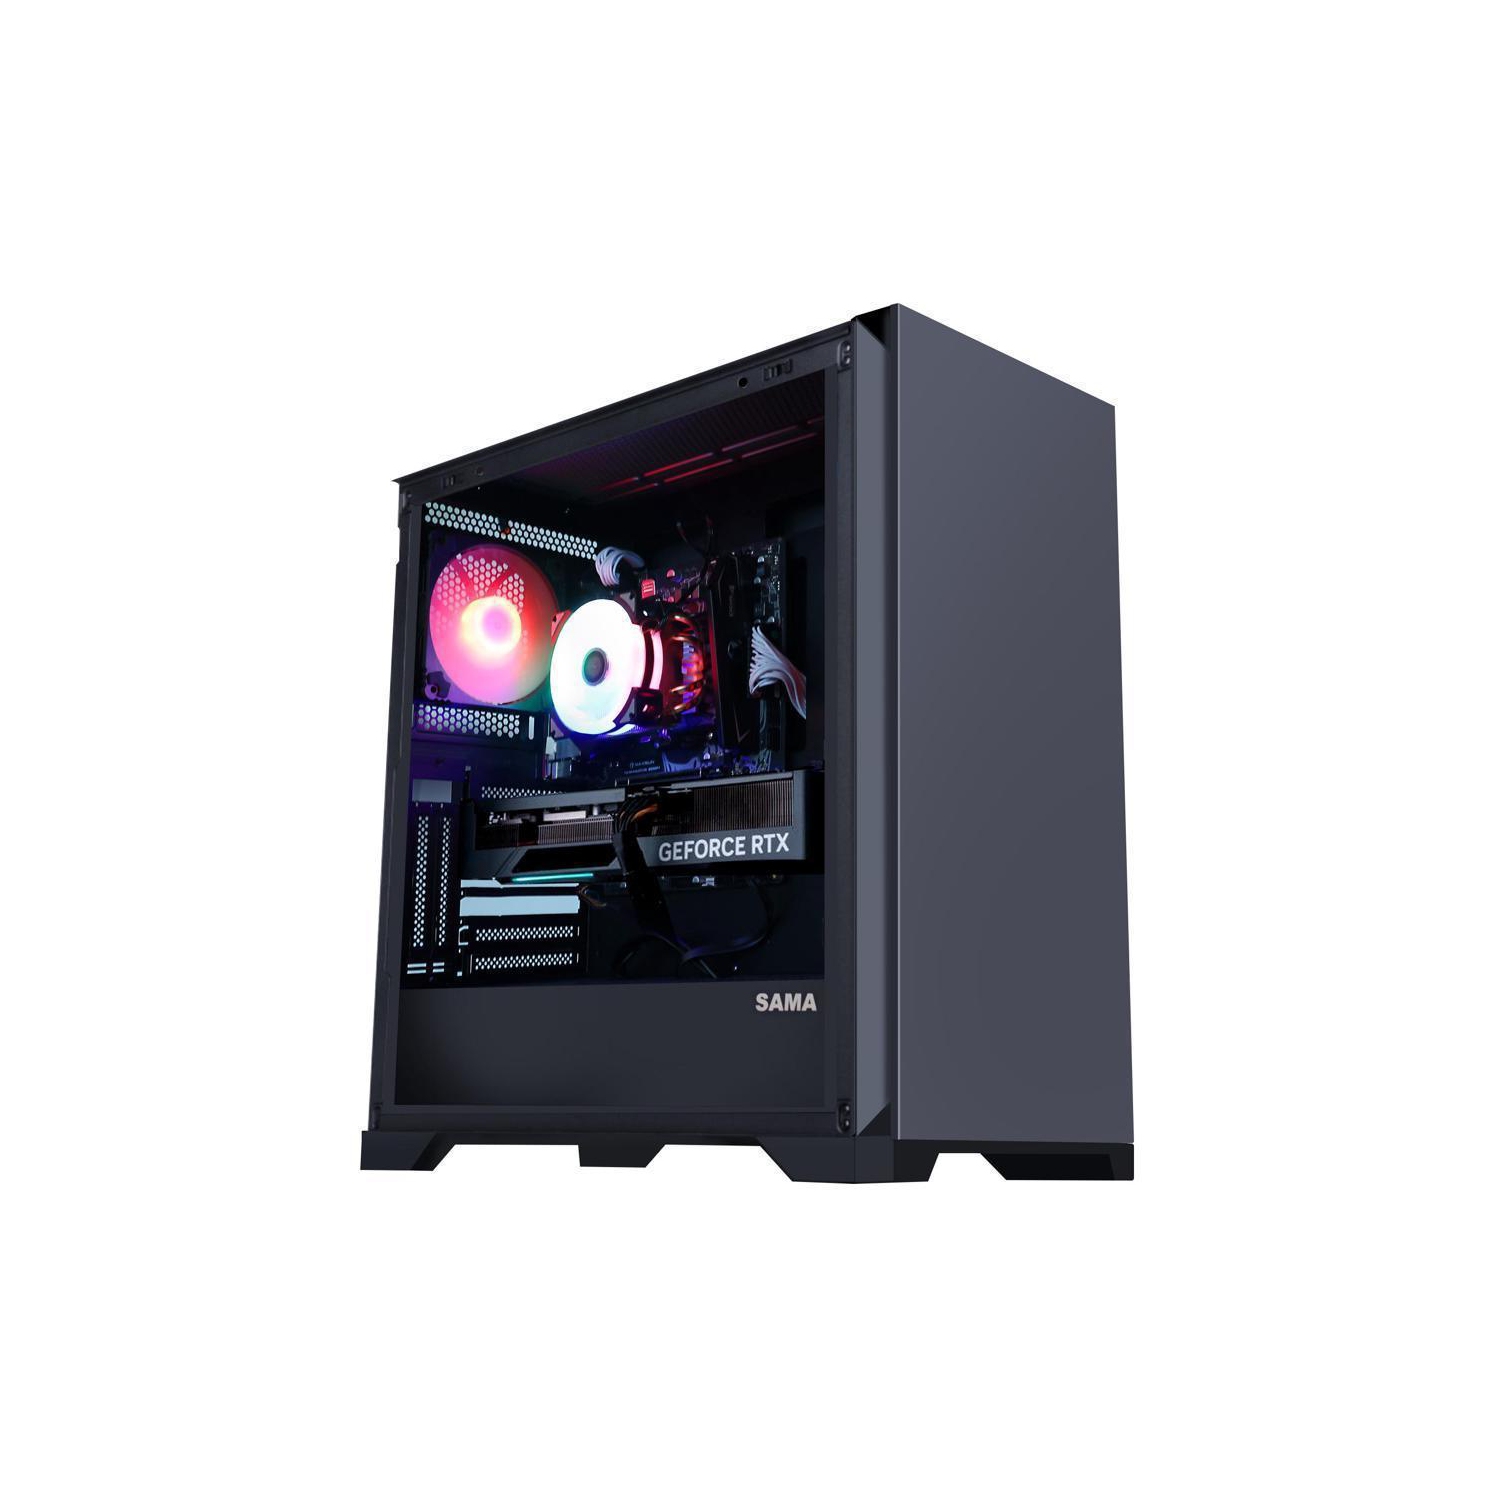 Hoengager Ares Gaming - Intel Core i5-12600K 10-Core 3.7GHz- GeForce GTX 1650- 16GB DDR4 3200MHz - 500GB M.2 + 1TB 2.5'' SATA SSD- WIFI -RGB Fans - Windows 11 Pro Computer